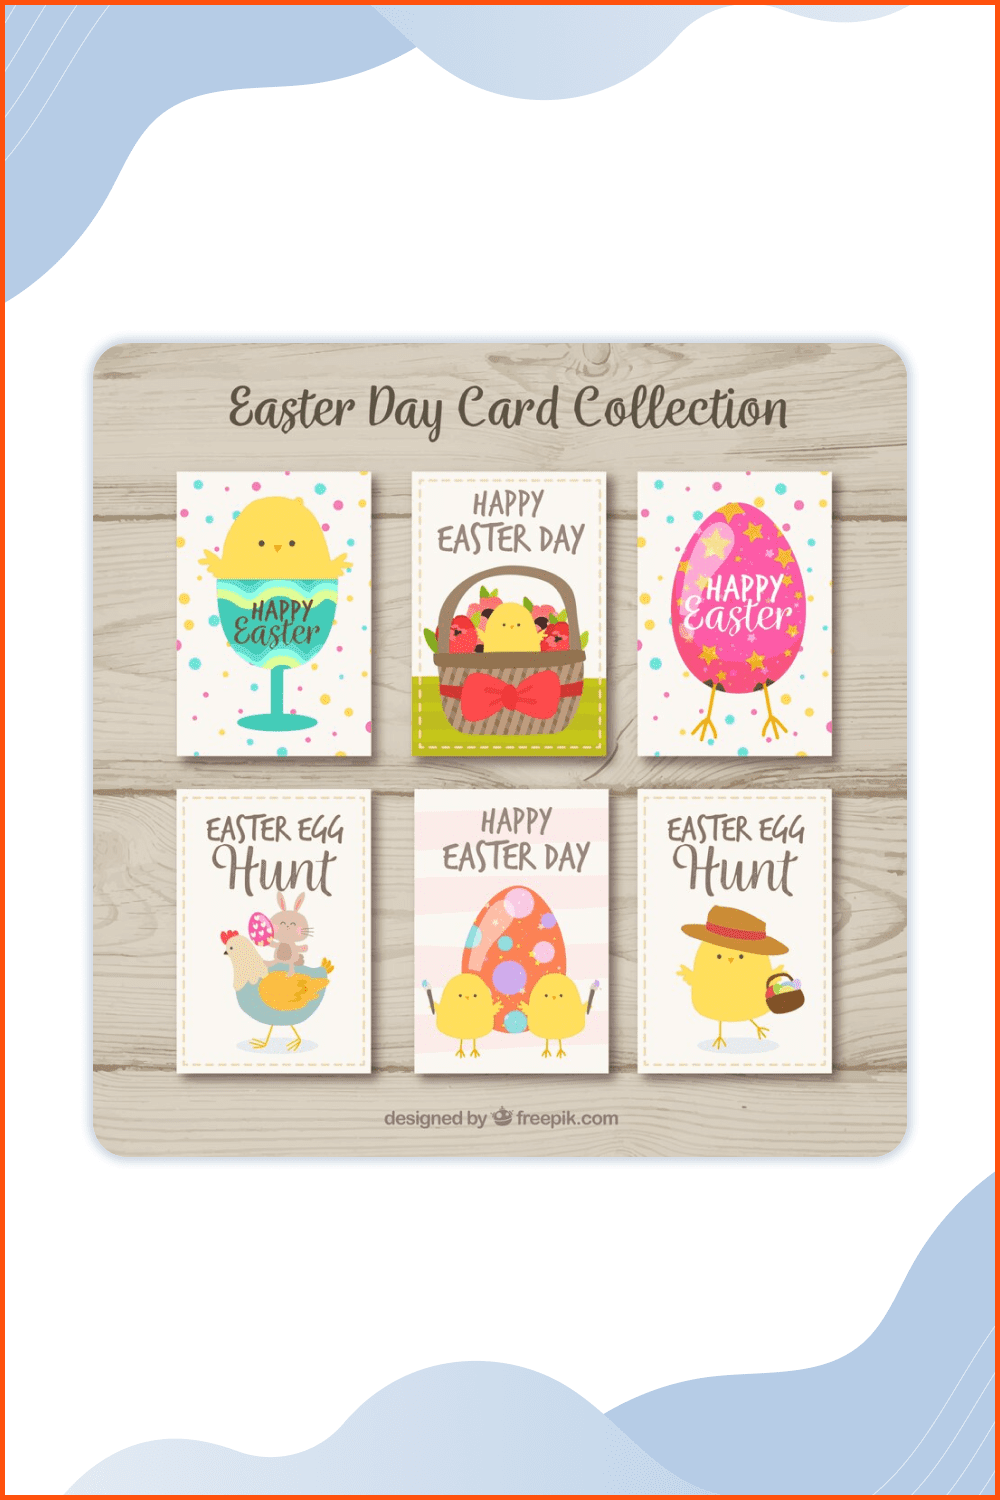 Easter day cards collection with cute birds.